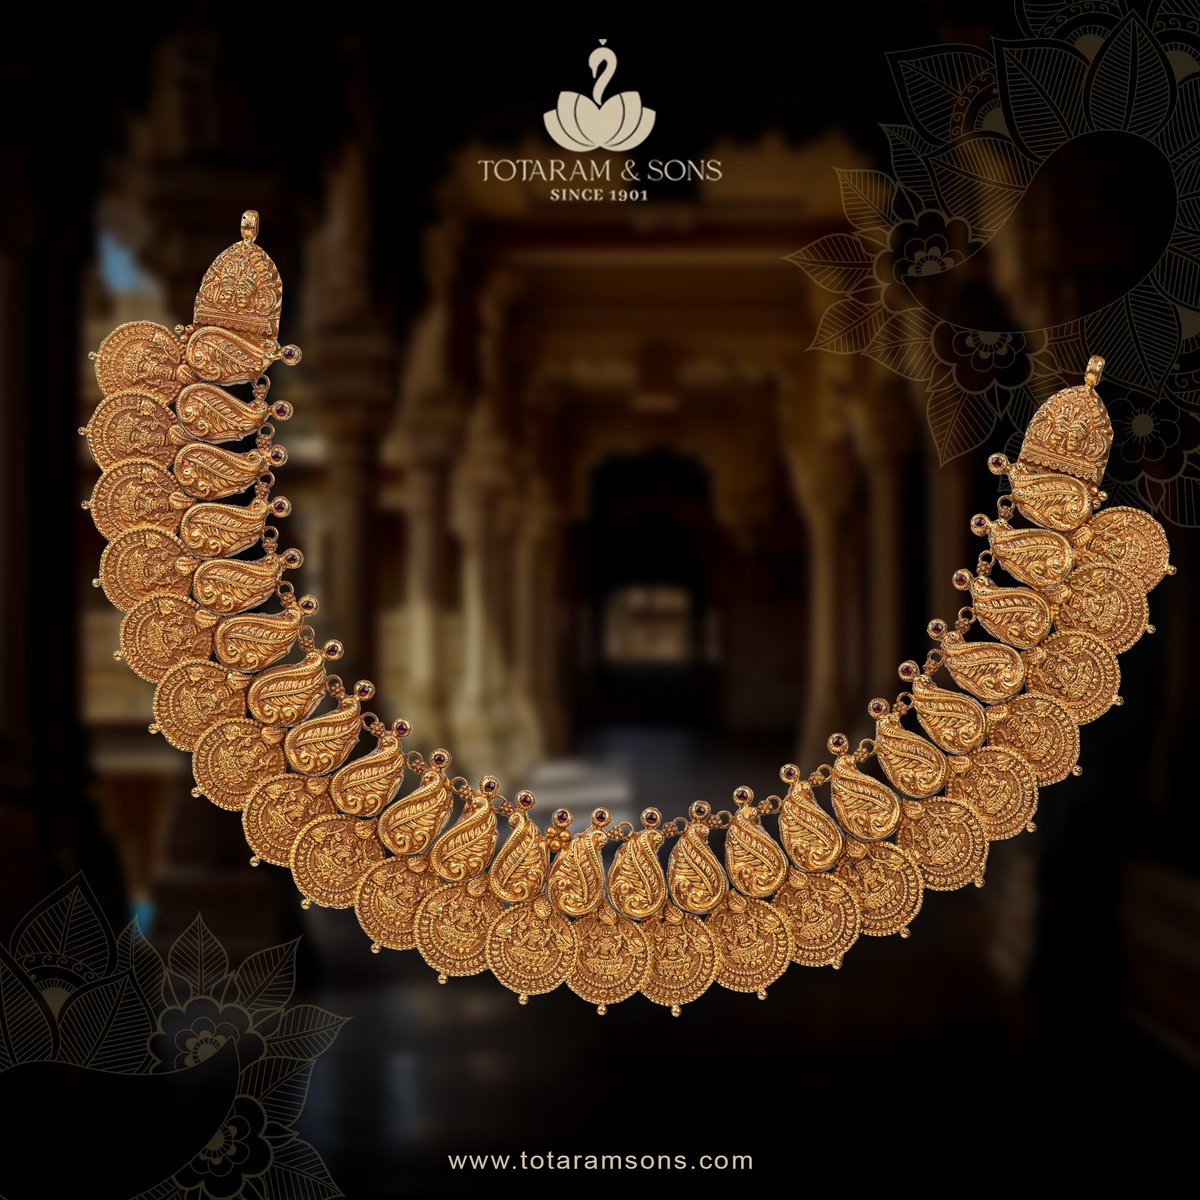 A golden necklace that is a symbol of your enduring style and a reflection of your inner radiance.
.
.
.
#totaramsons #totaramsonsjewellers #goldnecklace #gold #diamond #goldjewellery #jewelry #antiquejewellery #style #goldchoker #handmadejewellery #bride #pellikuthuru #sm4dm